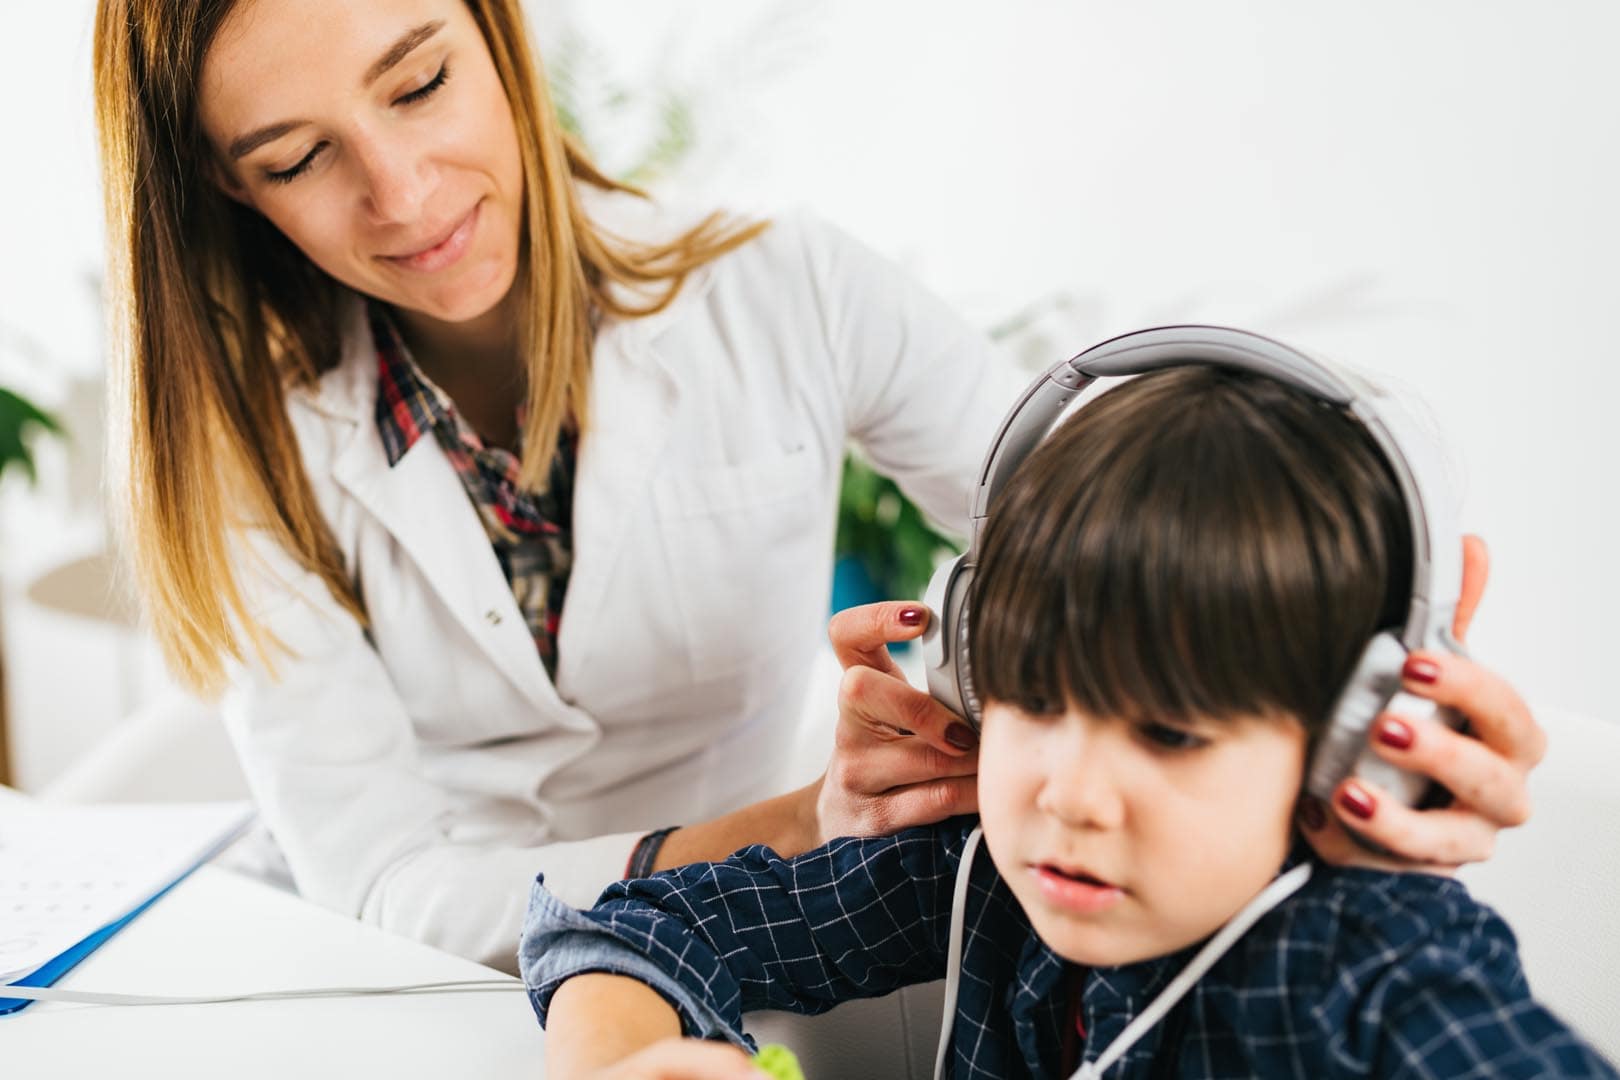 Hearing Problem Of Audio Disconnect In Children With Autism